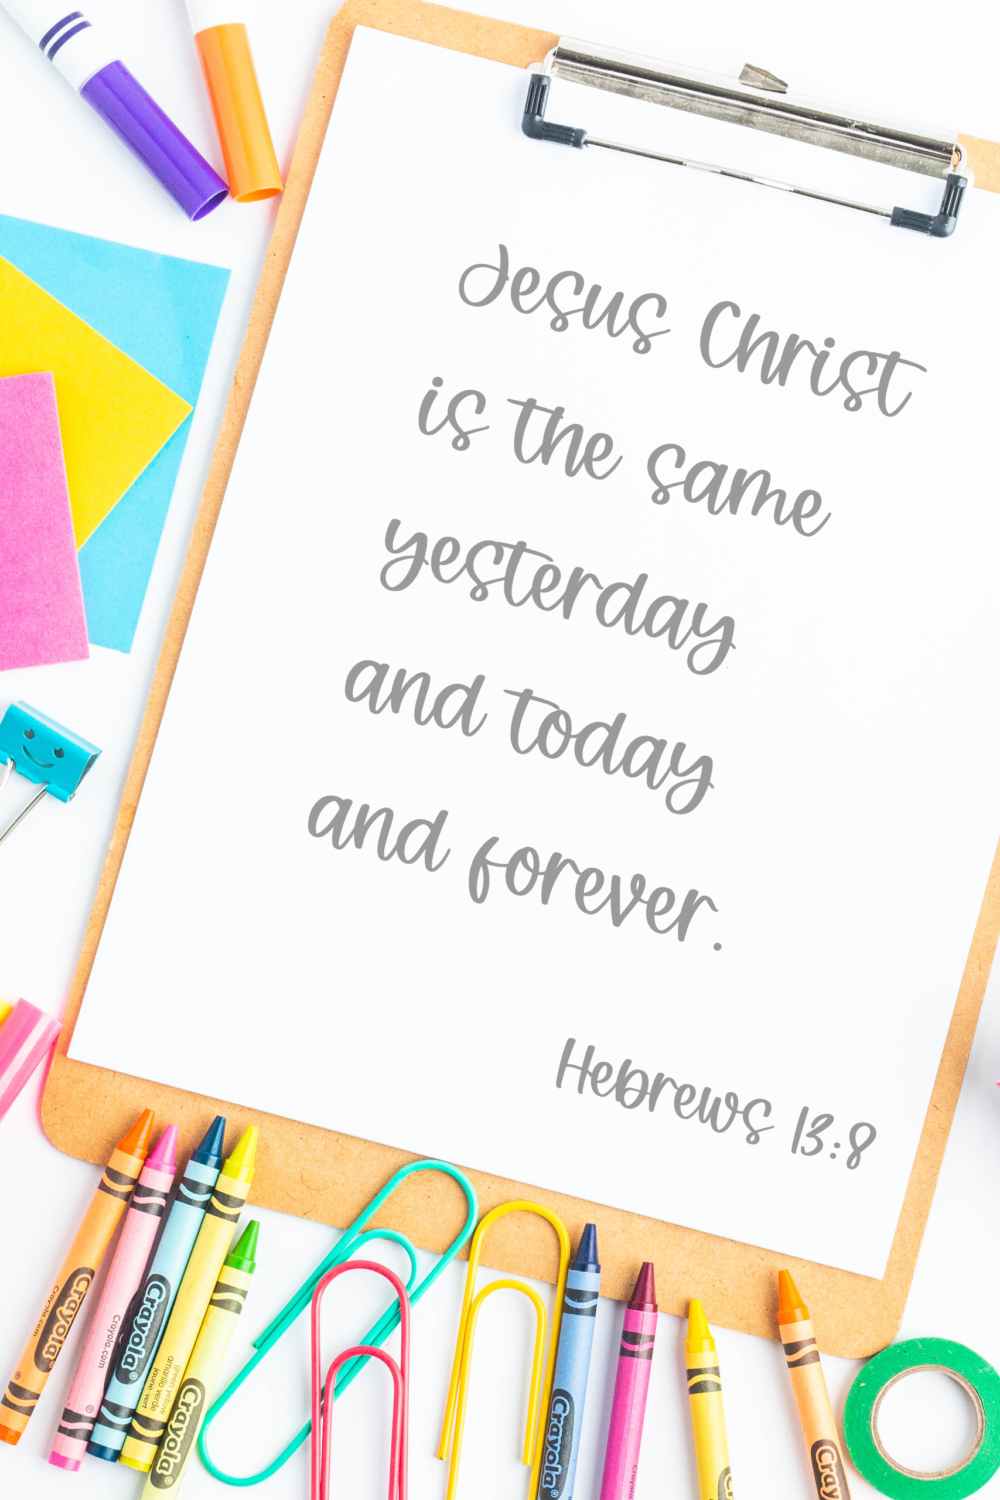 25 Easiest Verses to Memorize for Kids